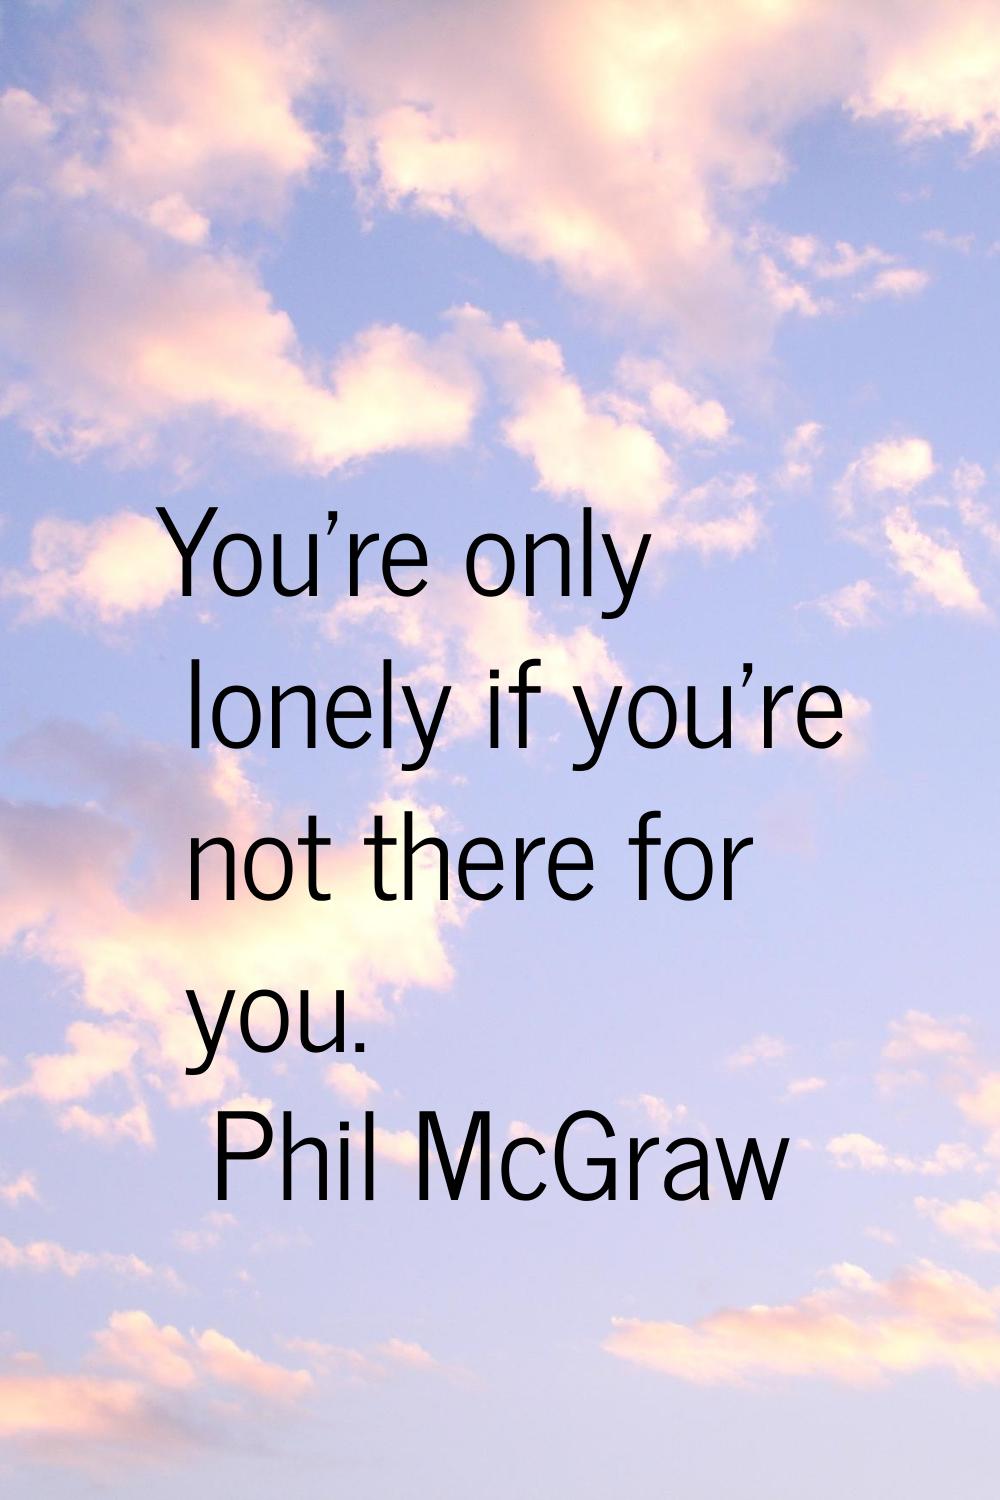 You're only lonely if you're not there for you.